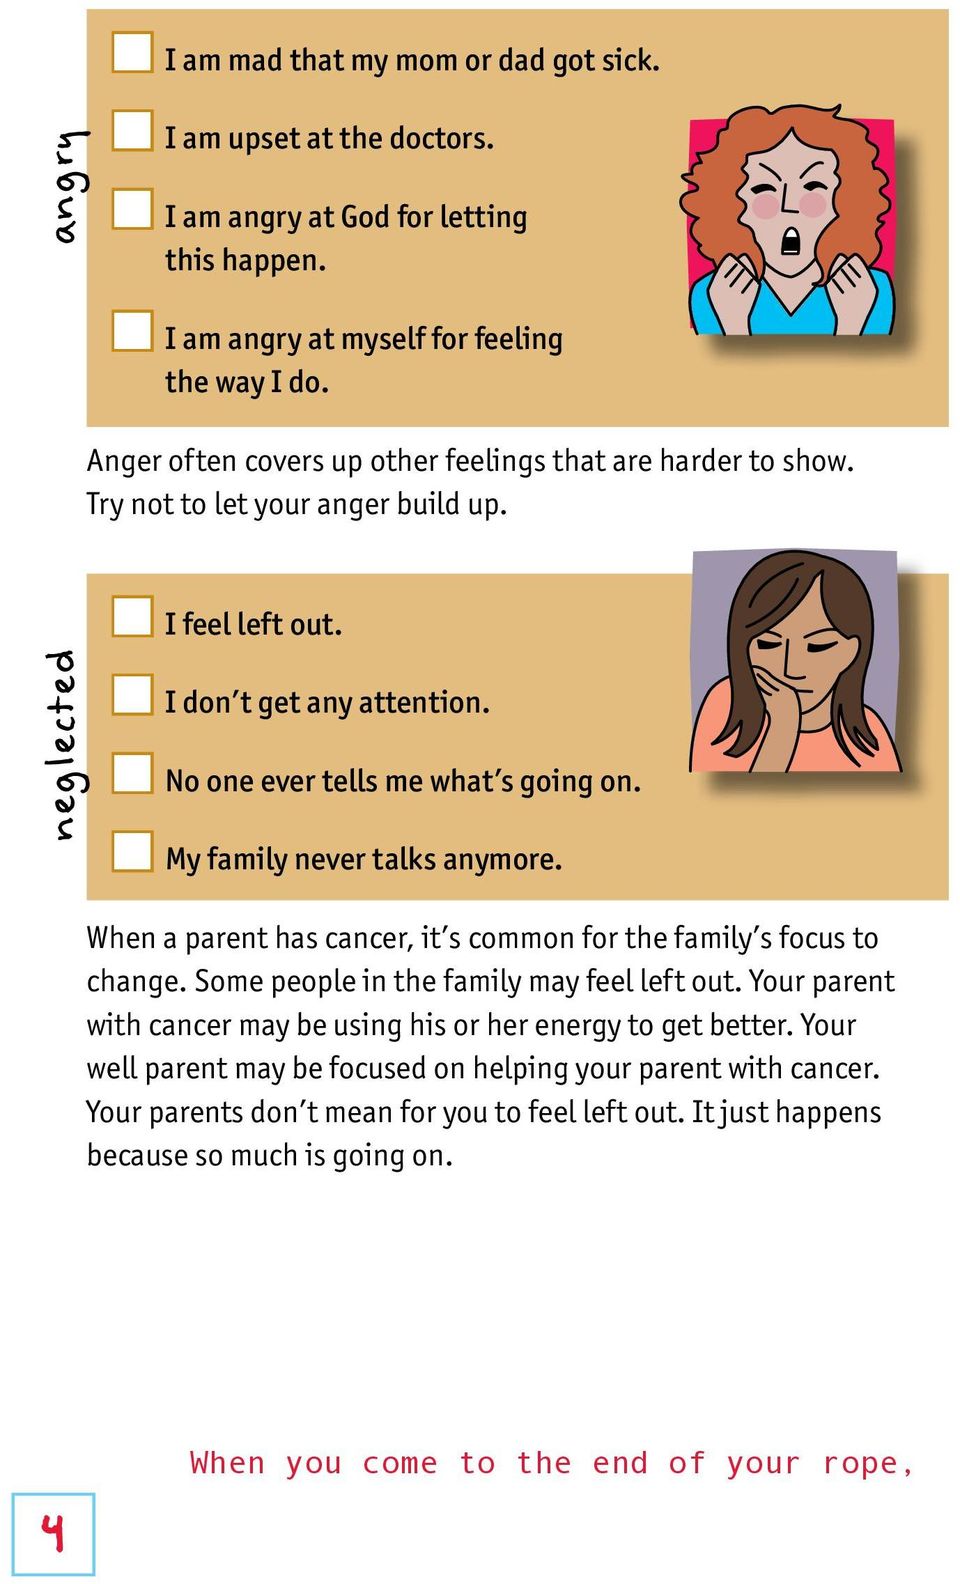 My family never talks anymore. When a parent has cancer, it s common for the family s focus to change. Some people in the family may feel left out.